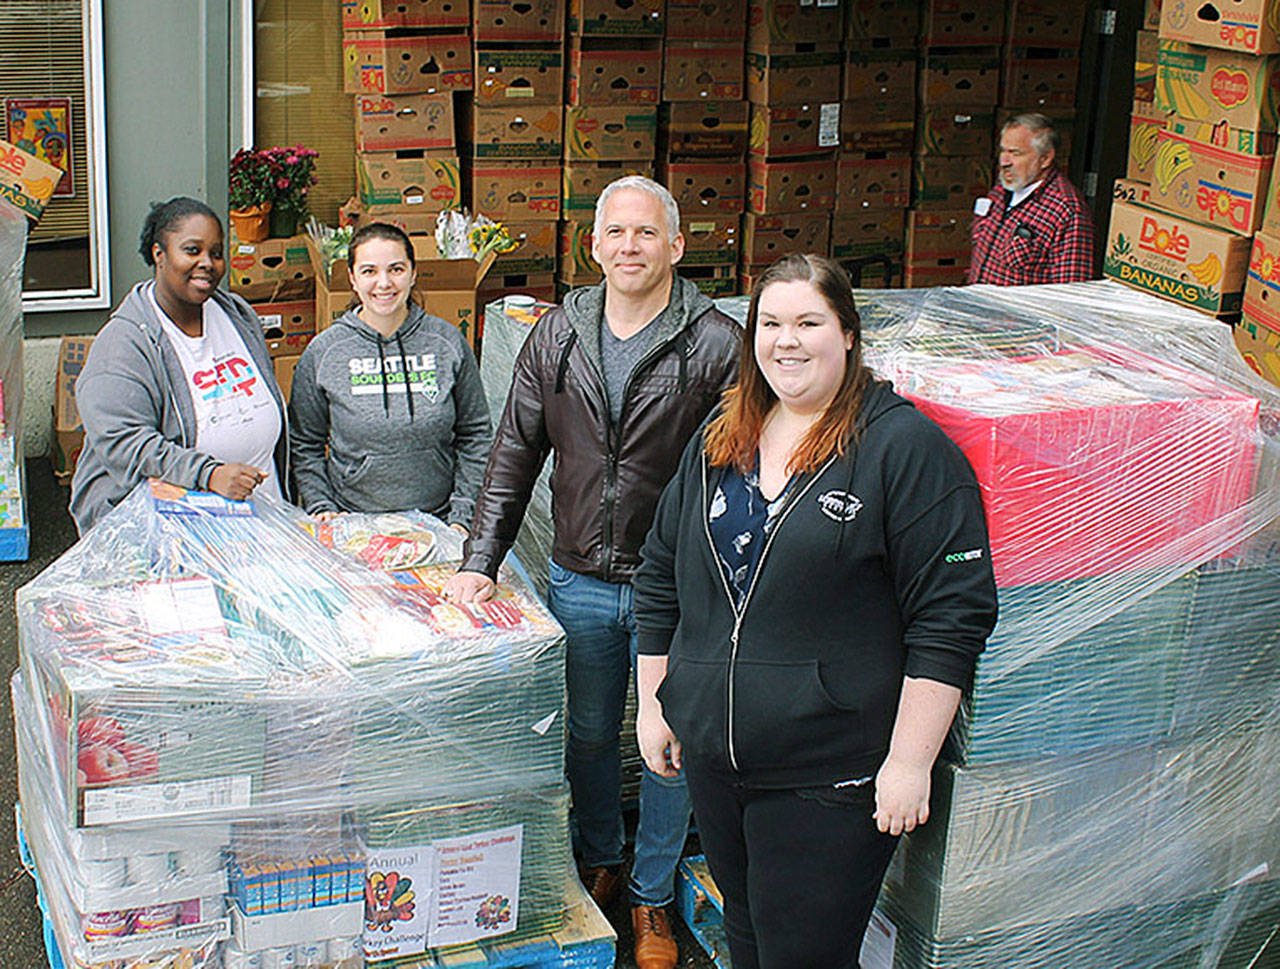 Camico Rivon, assistant director of Kent Food Bank, Jeniece Choate, executive director of Kent Food Bank, Torklift Central owner Jack Kay and Torklift Central employee Kerstin Stokes look on as goods are delivered for Thanksgiving to the Kent Food Bank. COURTESY PHOTO, Torklift Central